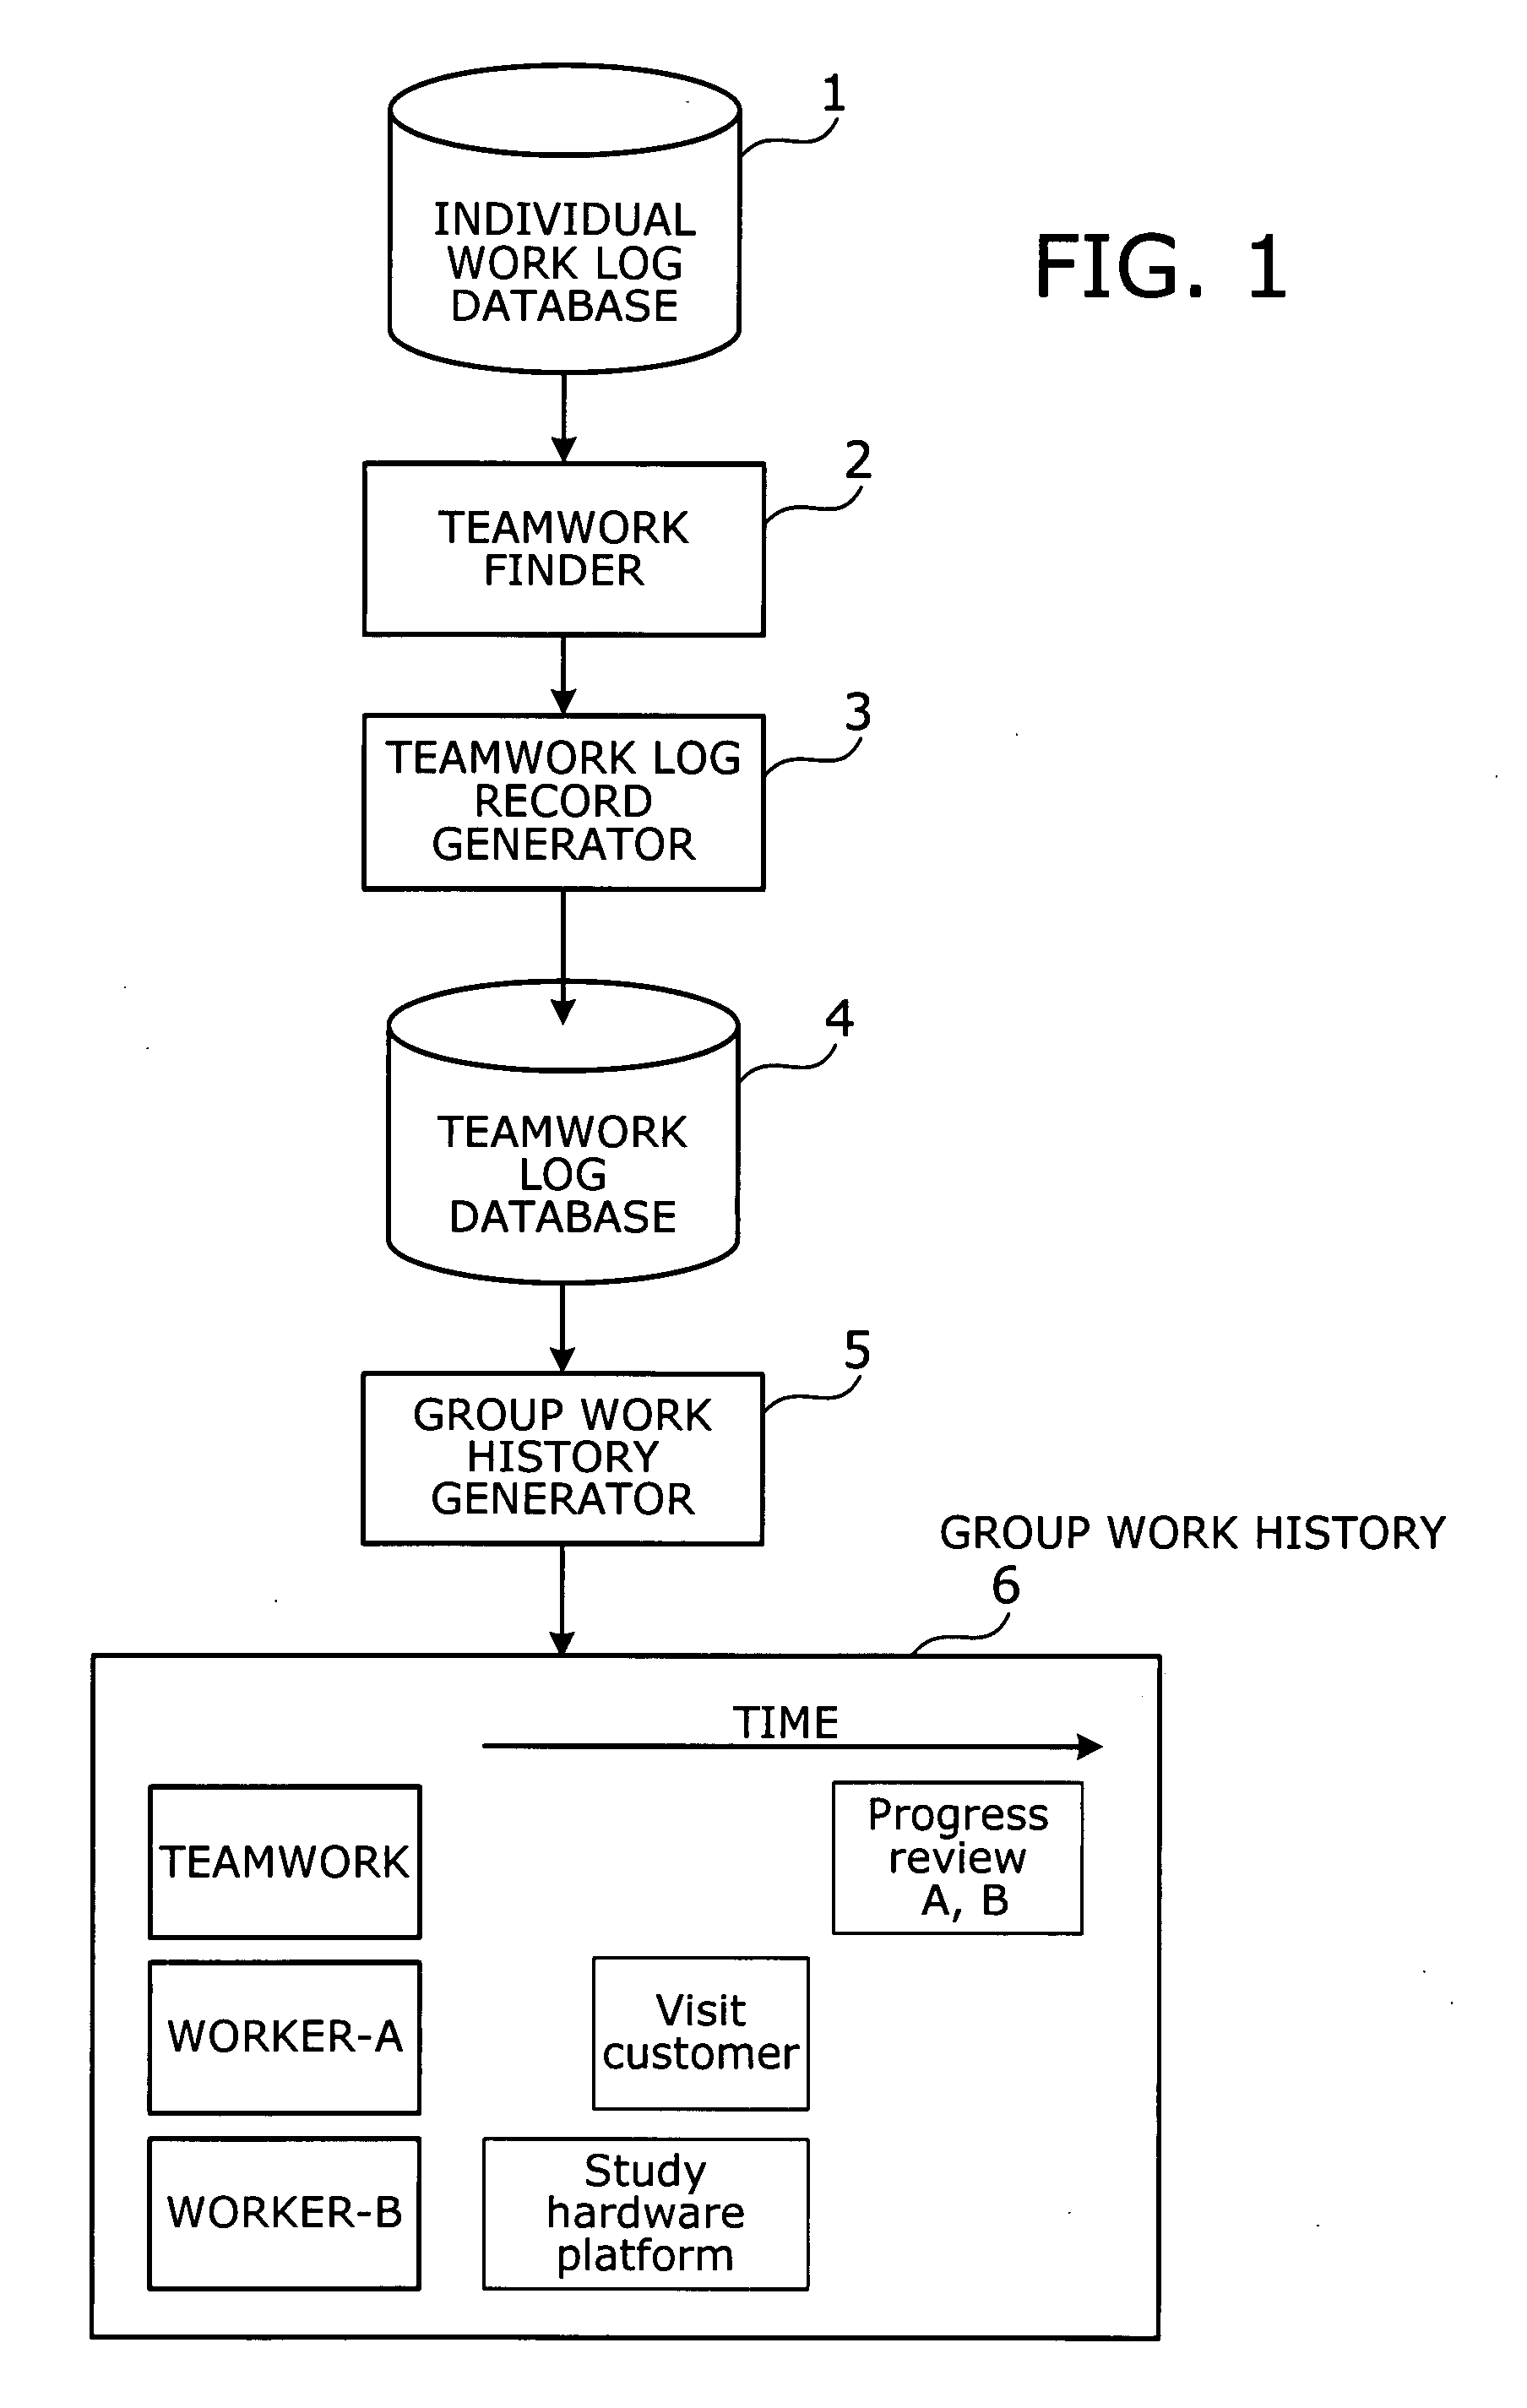 Program, method, and apparatus for analyzing group work activities in a project